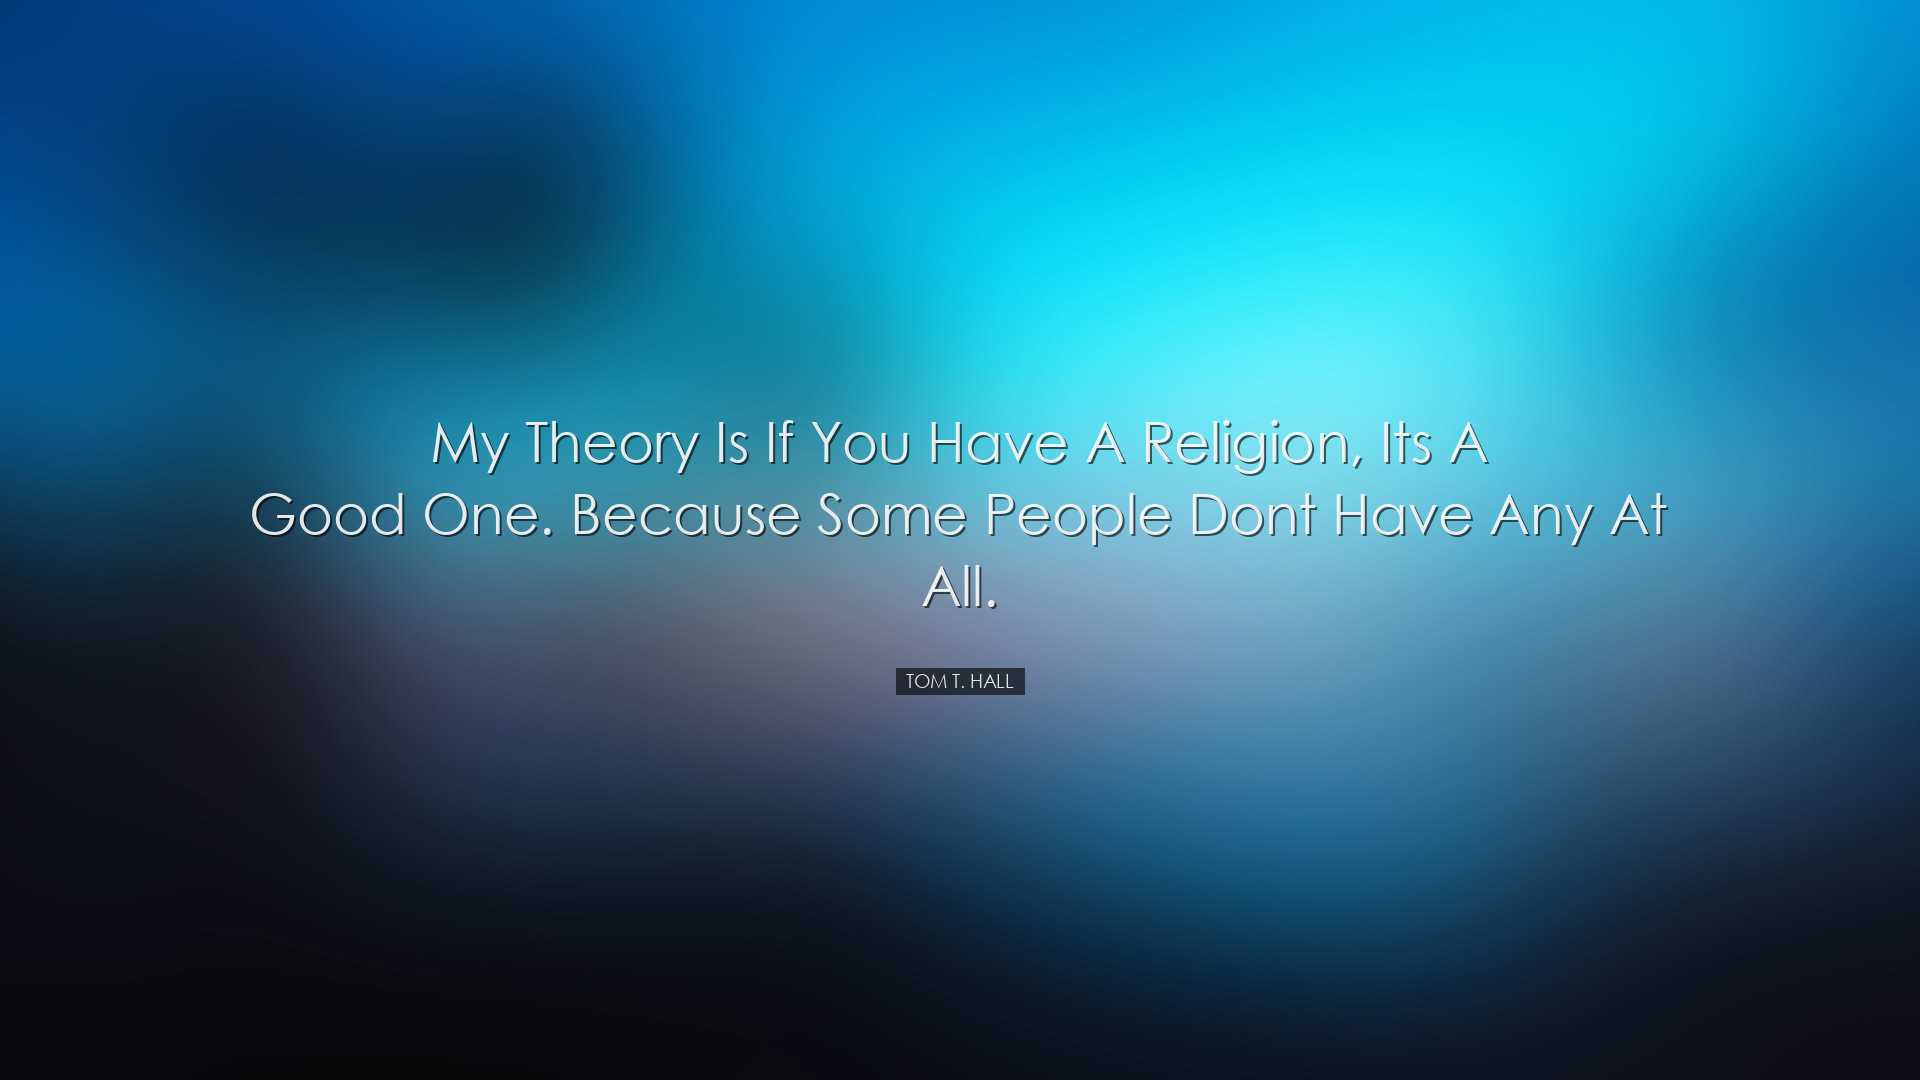 My theory is if you have a religion, its a good one. Because some